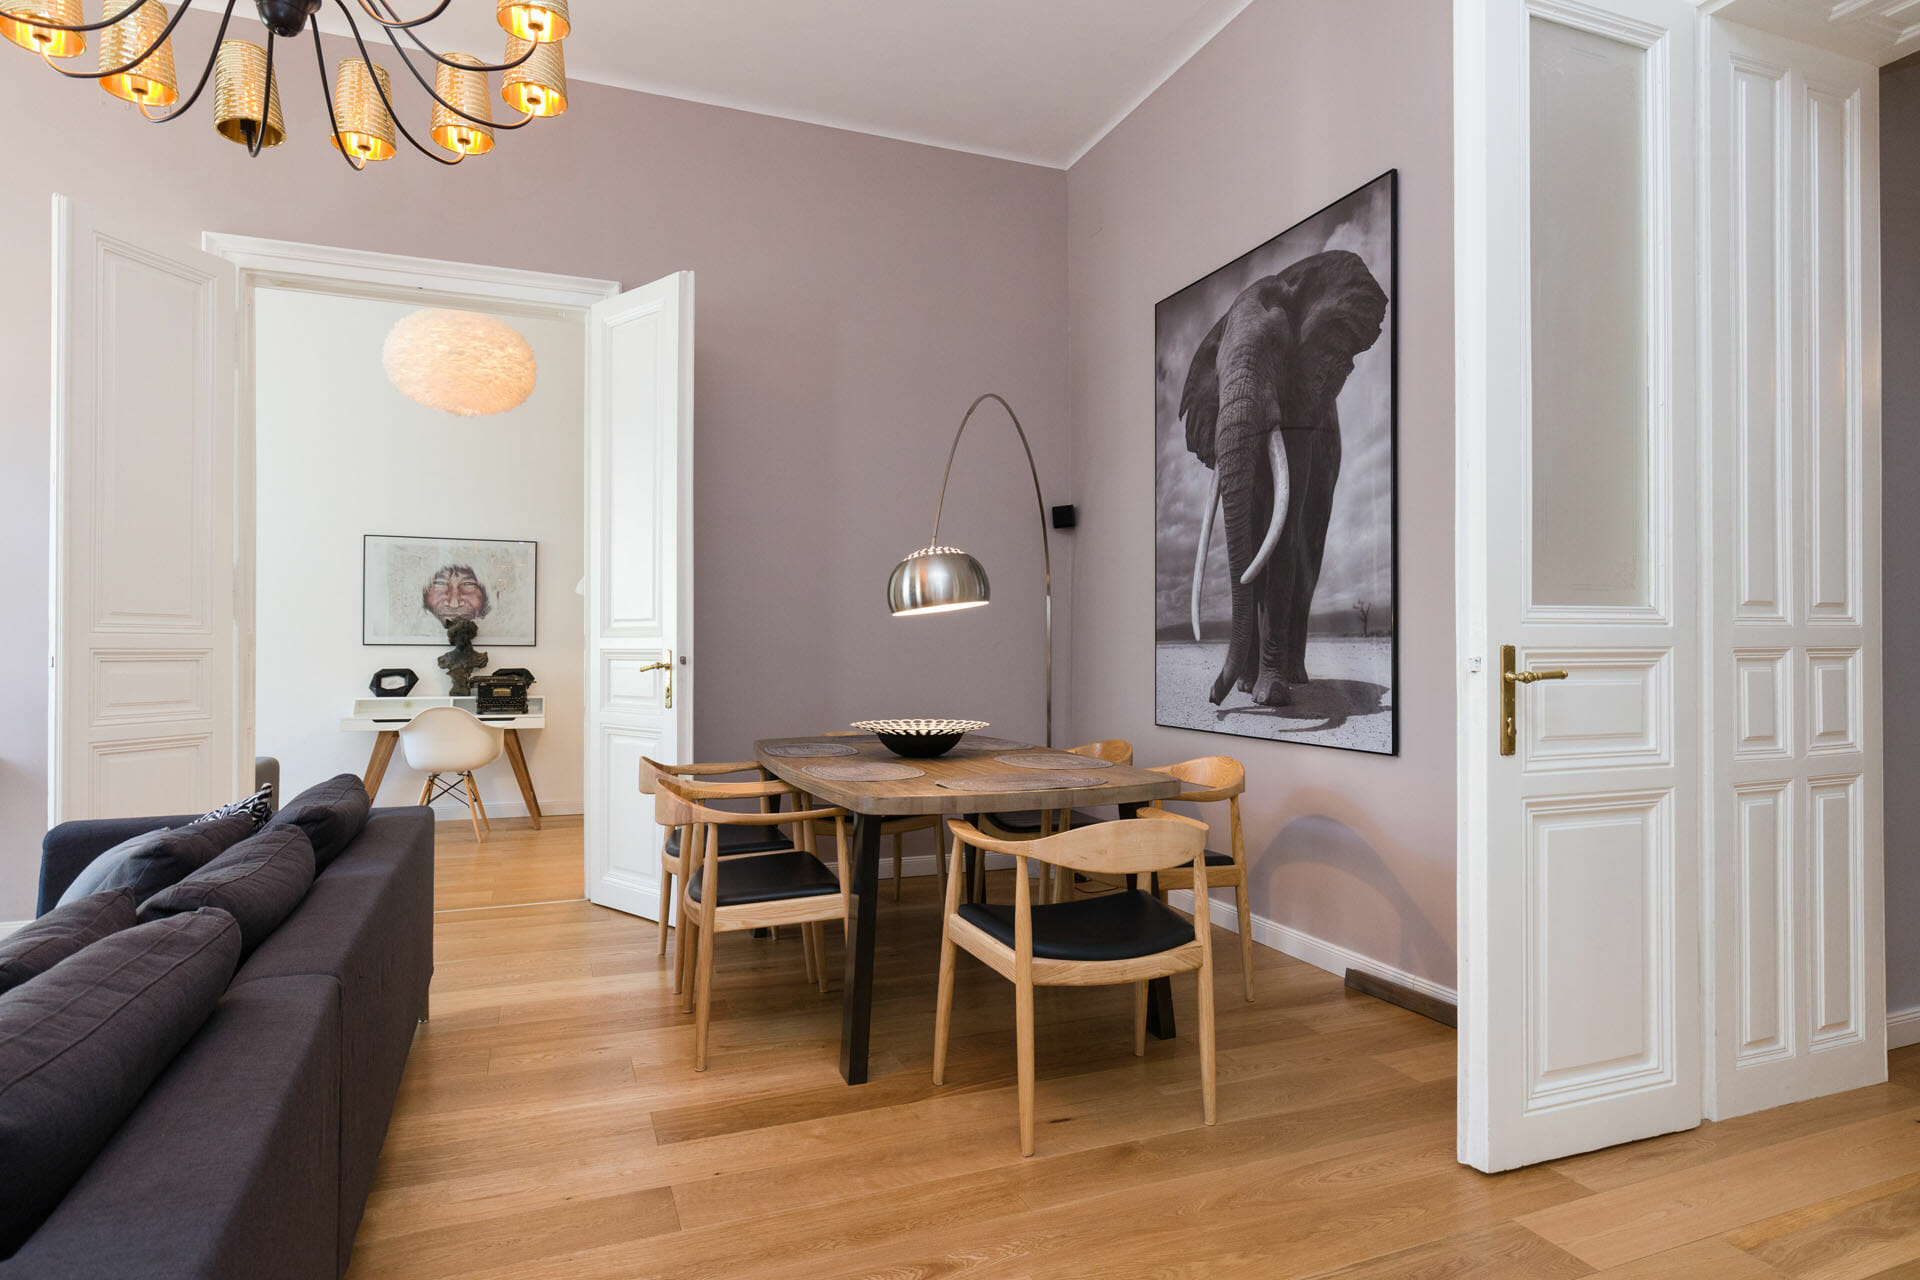 Prestige Apartments in Vienna. Pure Luxury in the Center of Vienna. First class 3 bedroom luxury apartment with space for up to 6 people - Live directly at the famous Stephansplatz.Graben 28.